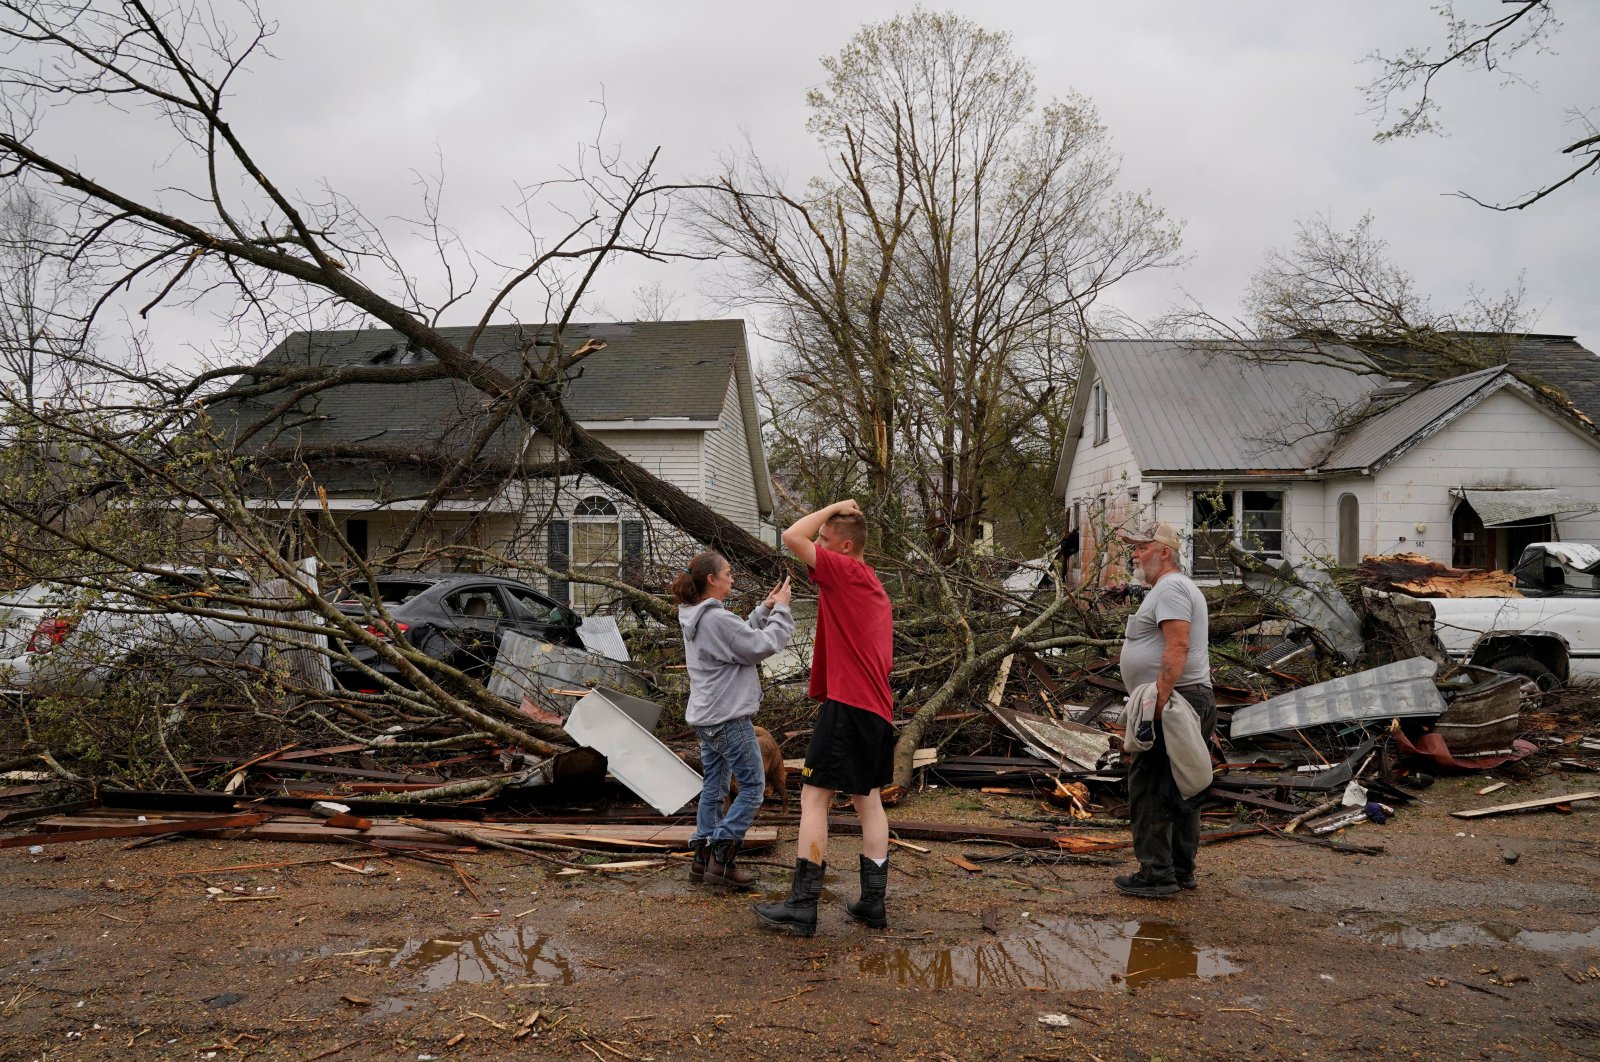 People react as they see the wreckage of their home in the aftermath of a tornado, in Glenallen, Missouri, U.S., April 5, 2023. (Reuters Photo)